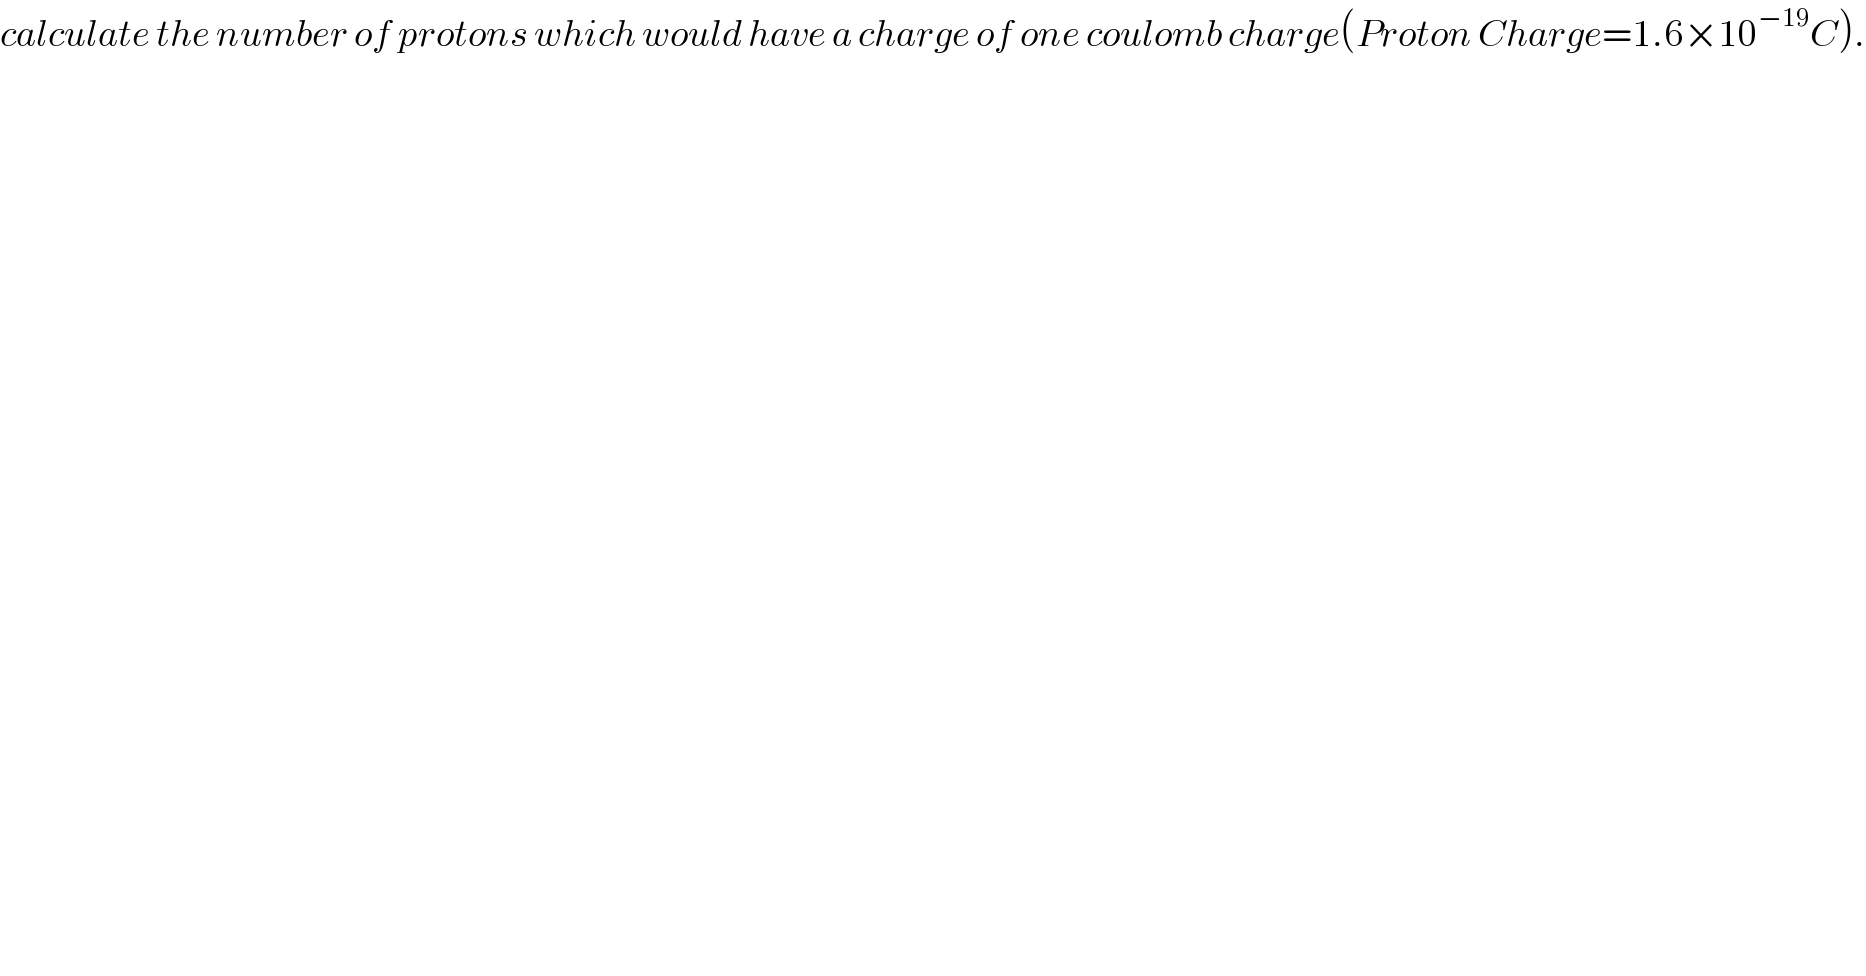 calculate the number of protons which would have a charge of one coulomb charge(Proton Charge=1.6×10^(−19) C).  